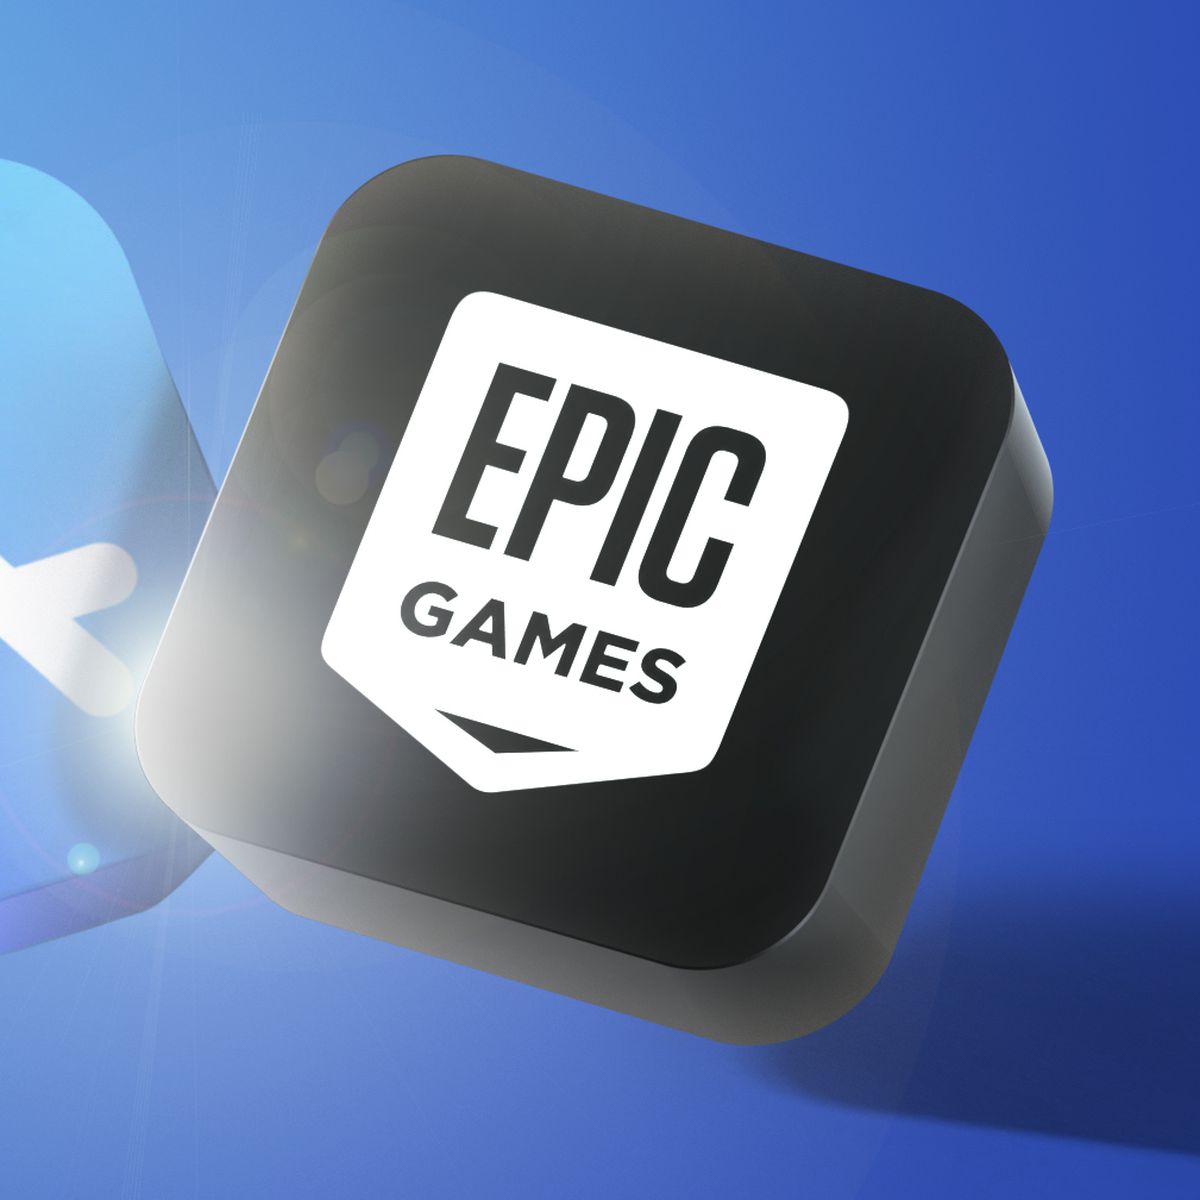 Epic Lost Trial Due to Flawed Argument, Not Legal Error, Apple